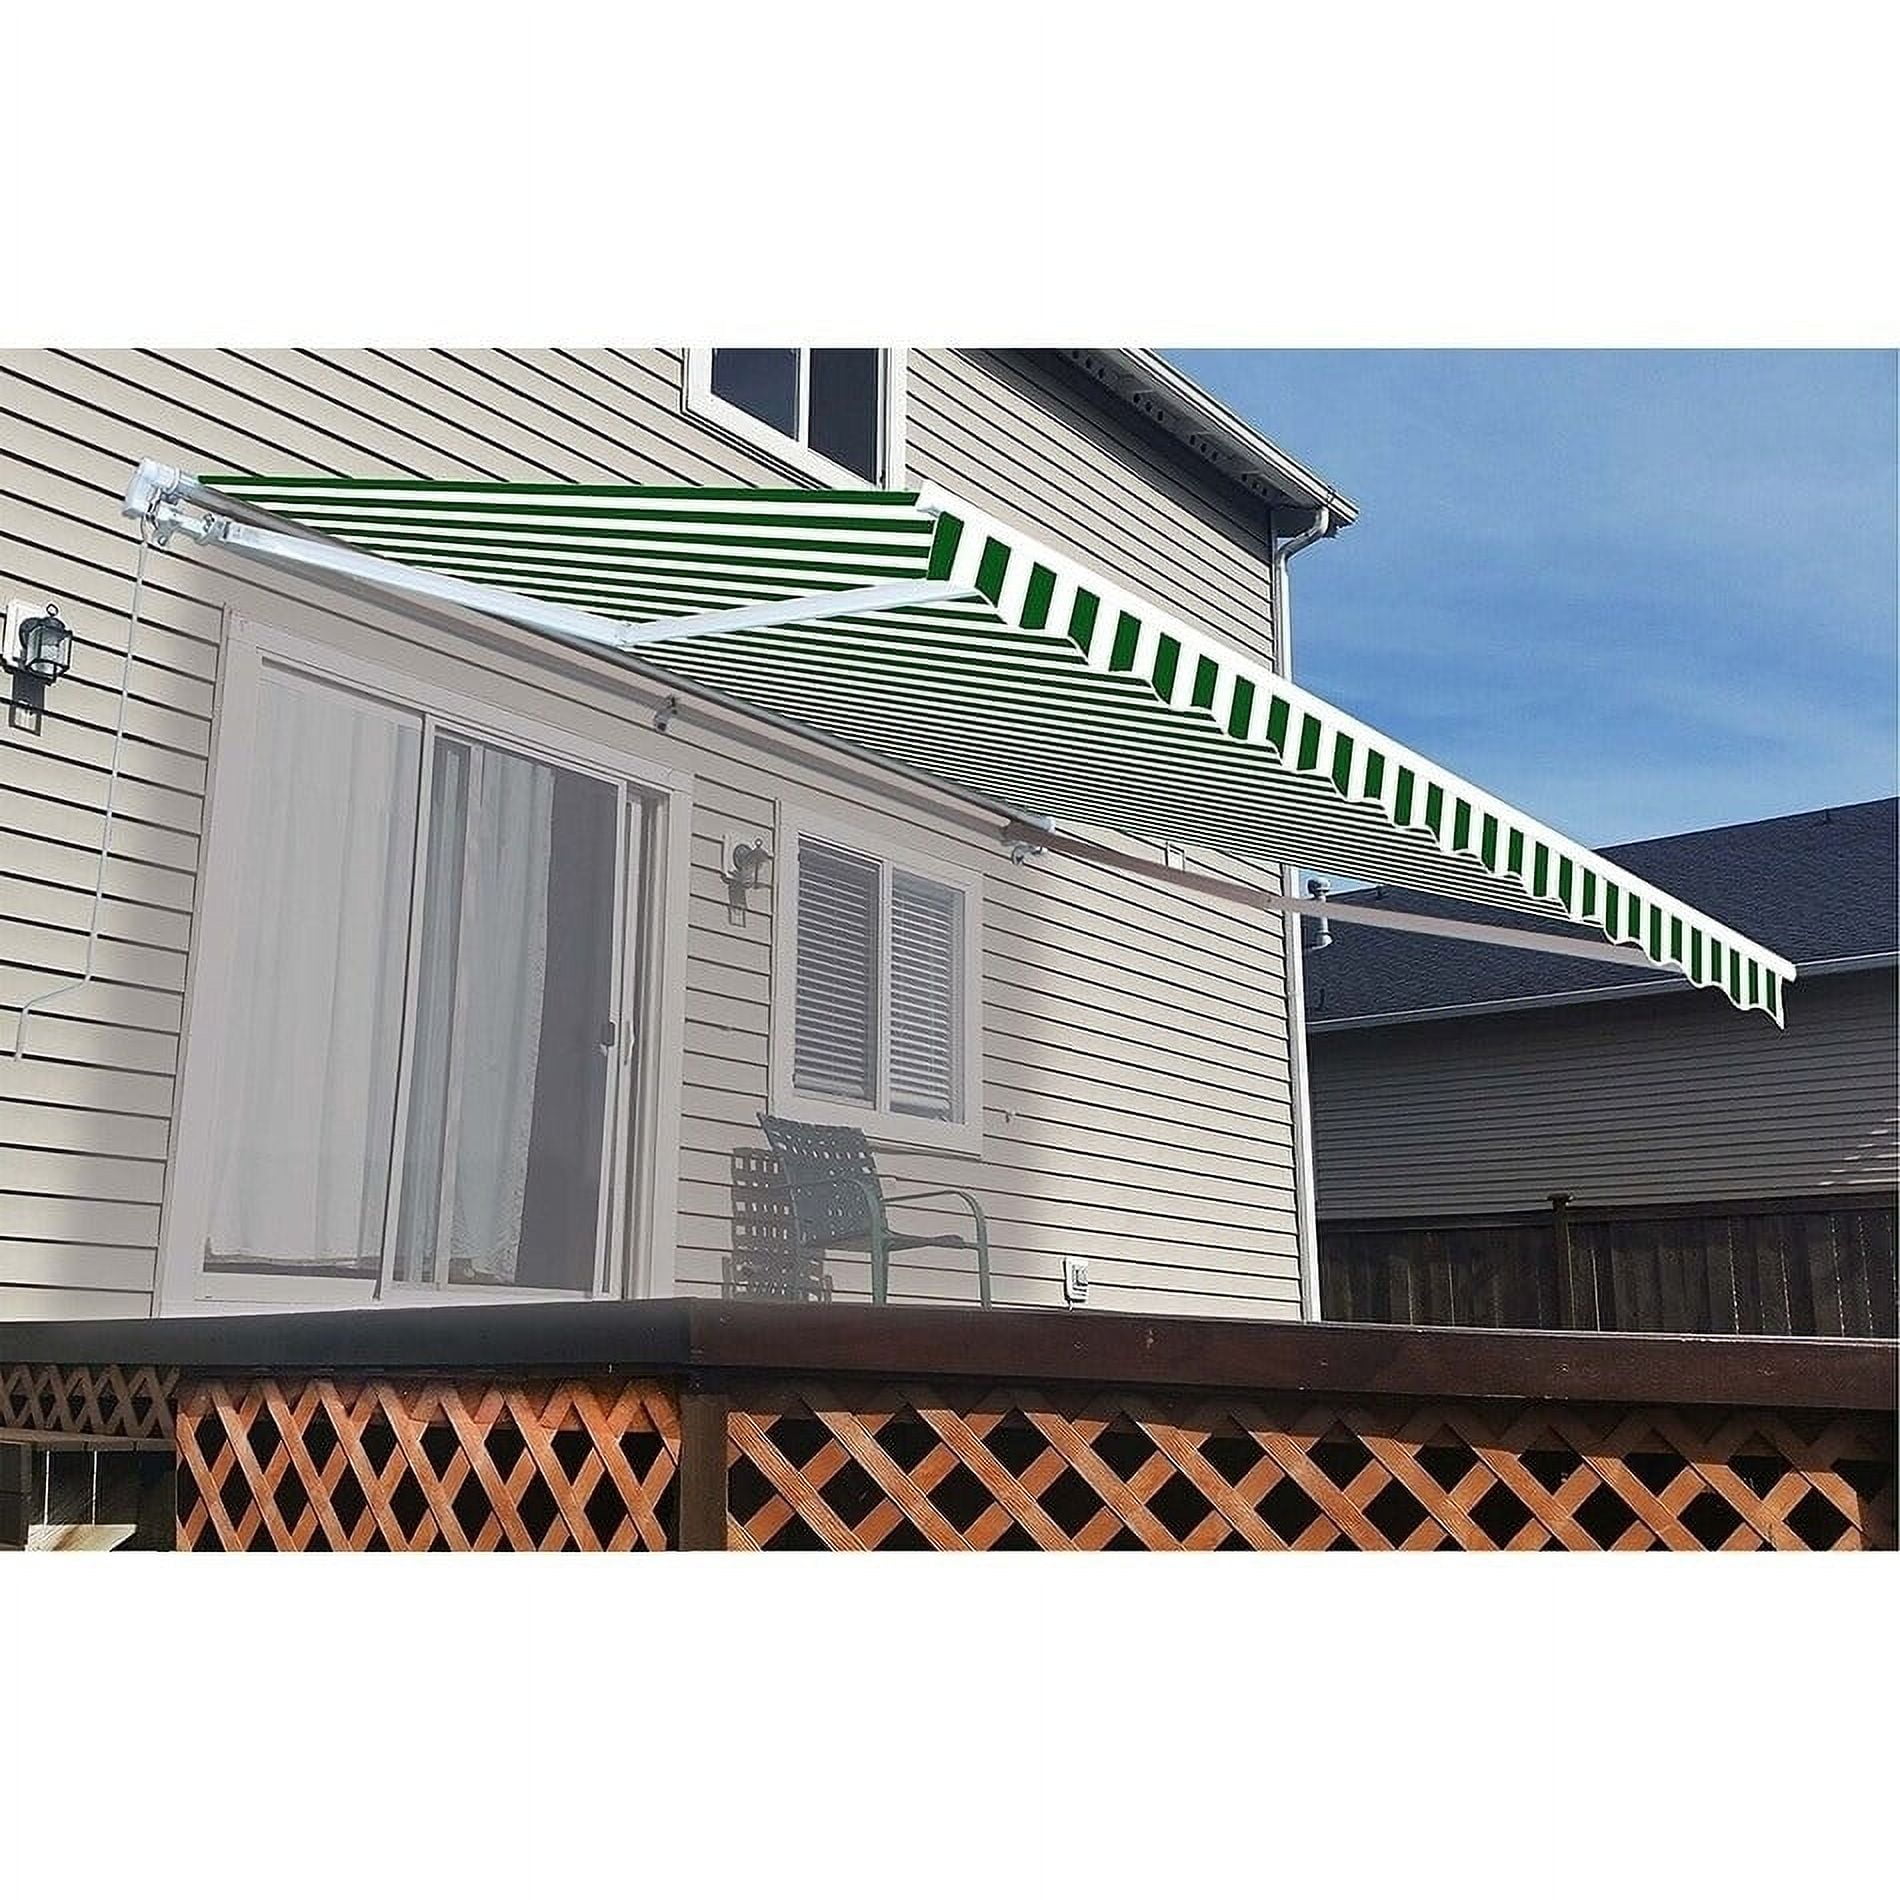 16 X 10 Ft. Retractable Outdoor Motorized Patio Awning, White & Green